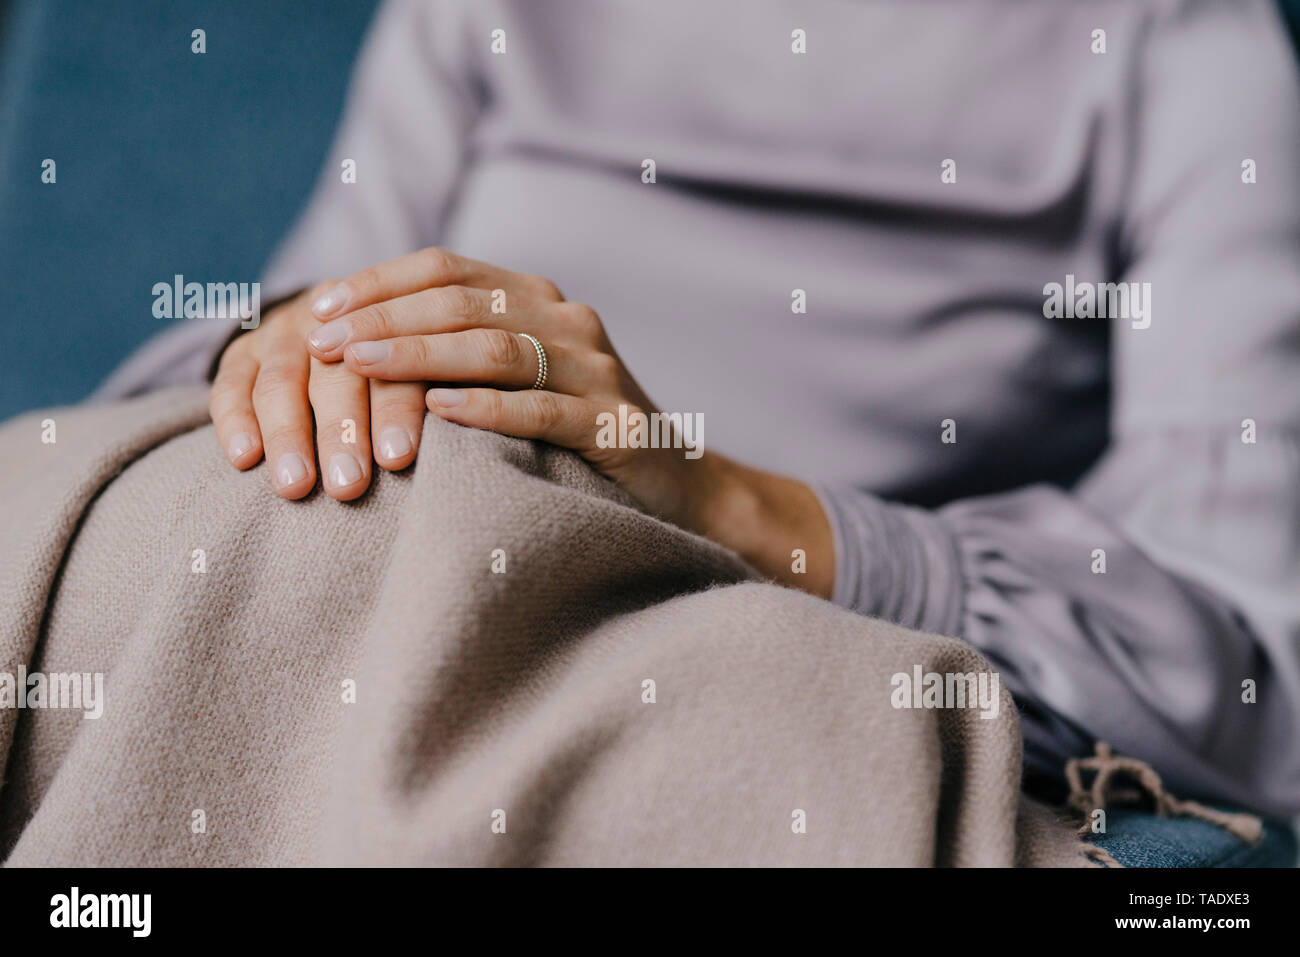 Folded hands of a woman on a blanket over her knees Stock Photo